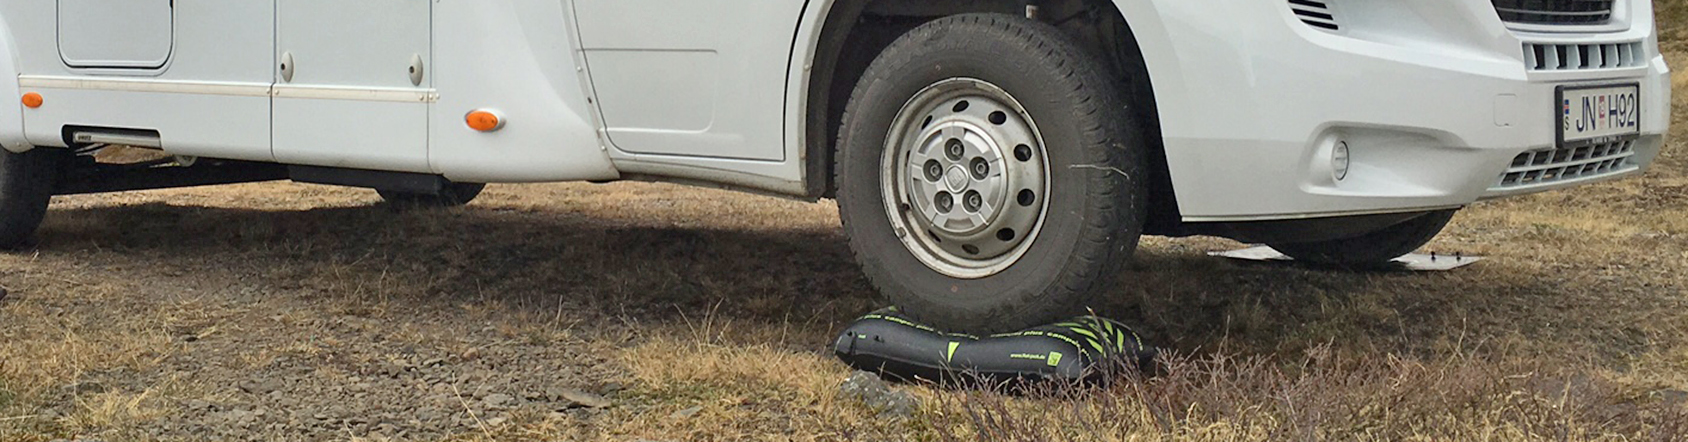 air pillow for camping vehicles - flat jack